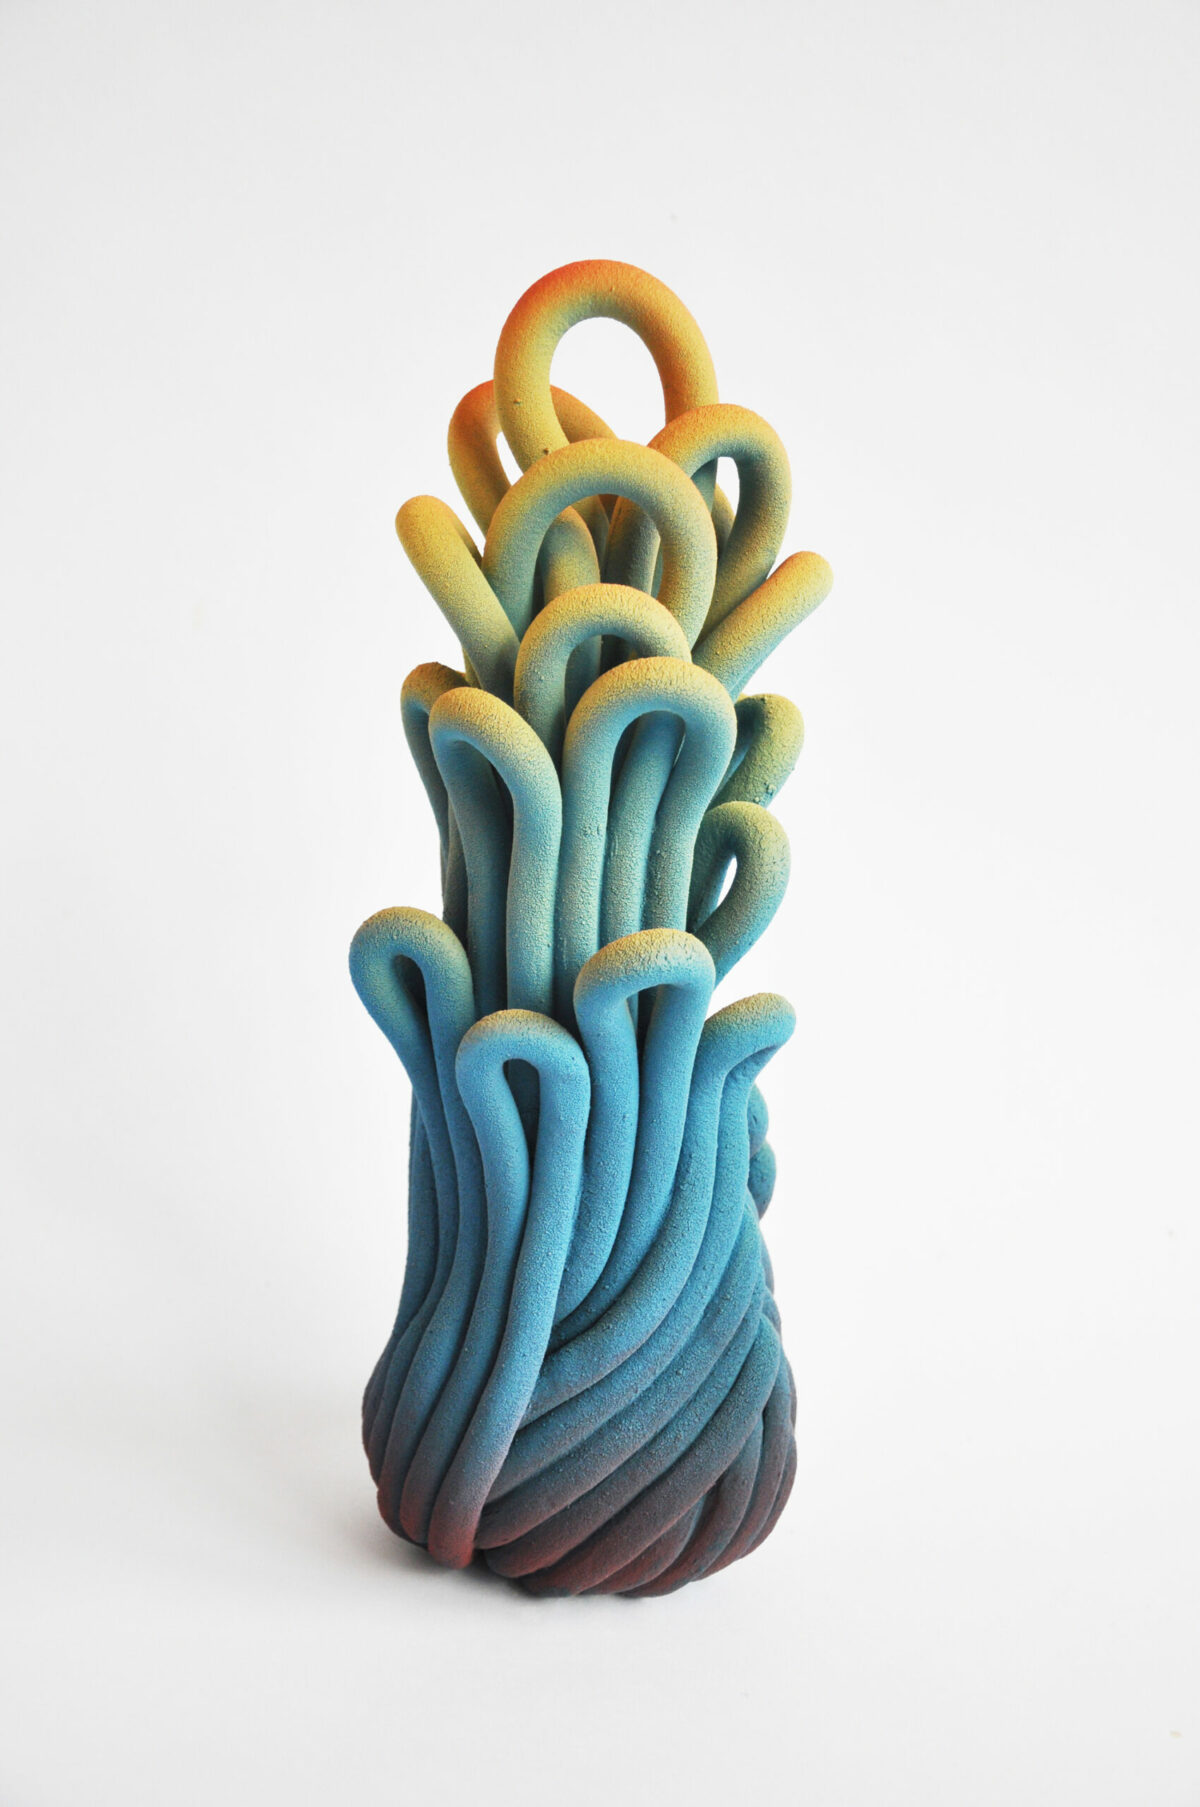 Mesmerizing Abstract Ceramic Sculptures Composed Of Multiples Loops Tentacles And Coils By Claire Lindner 2